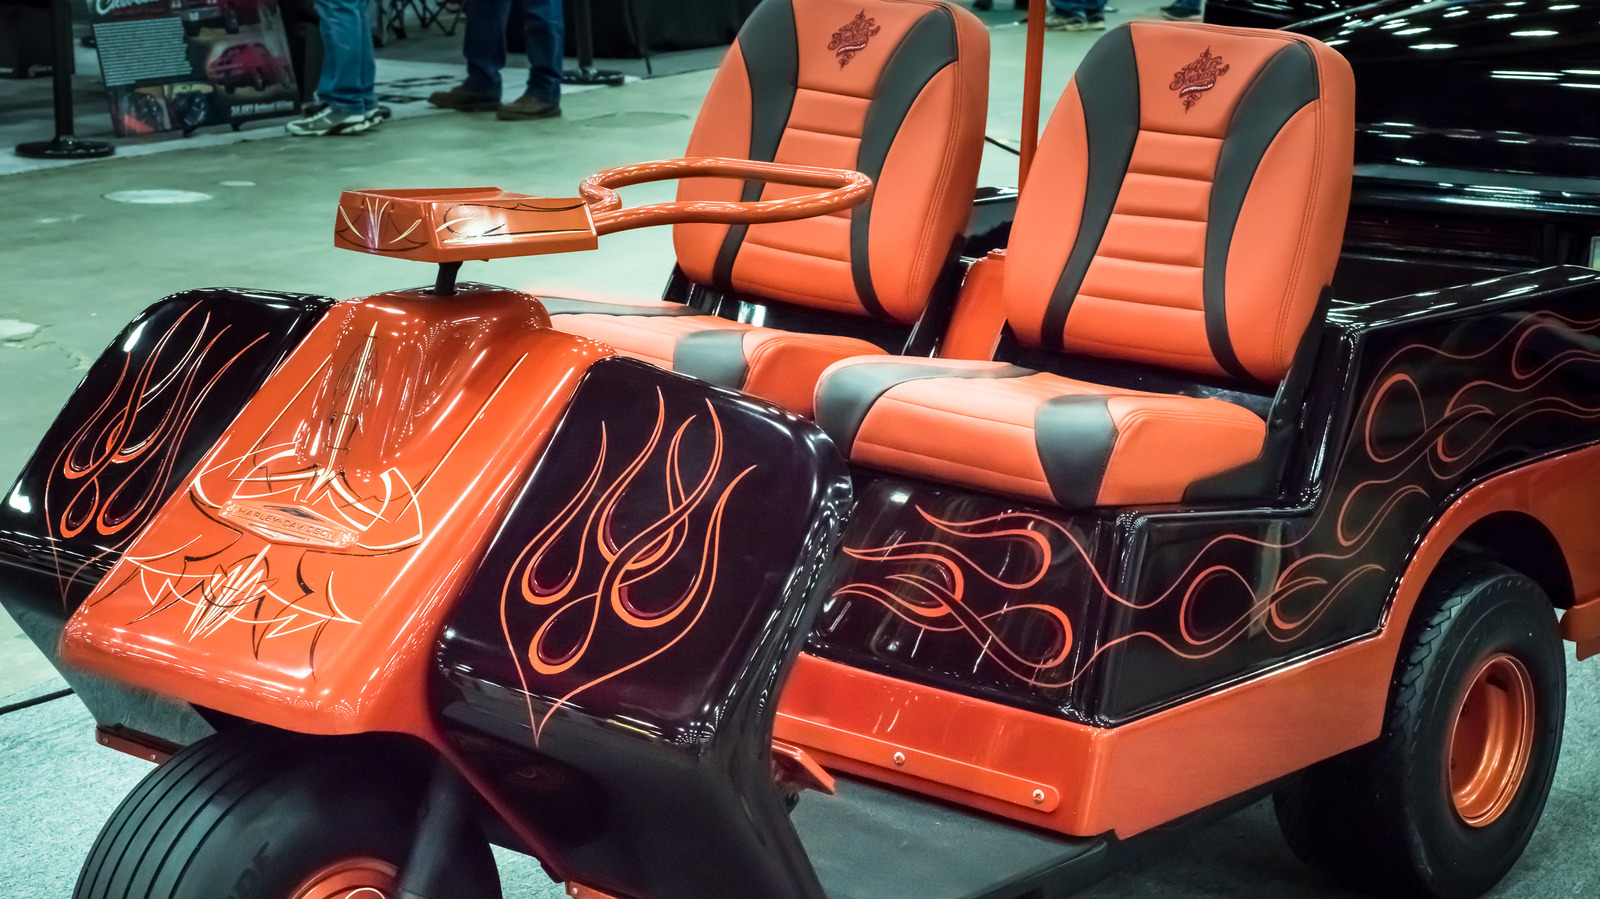 Did You Know Harley-Davidson Used To Make Golf Carts? Now They're
Collectibles